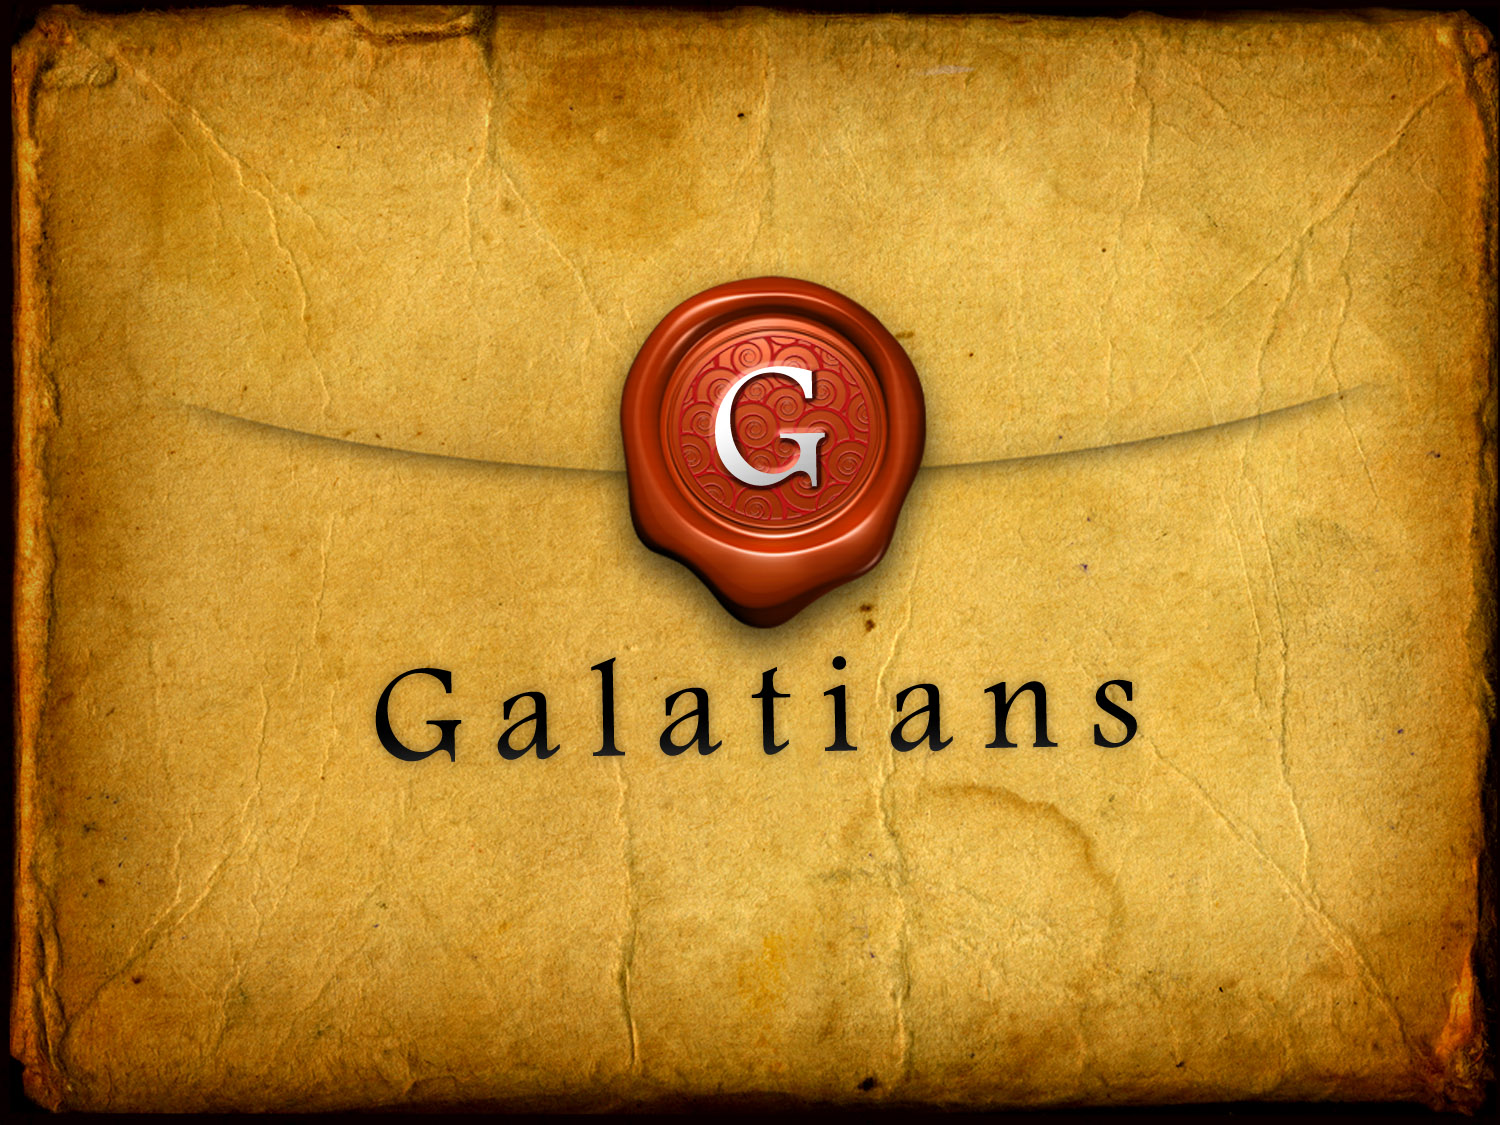 The Book of Galatians 5:16,17